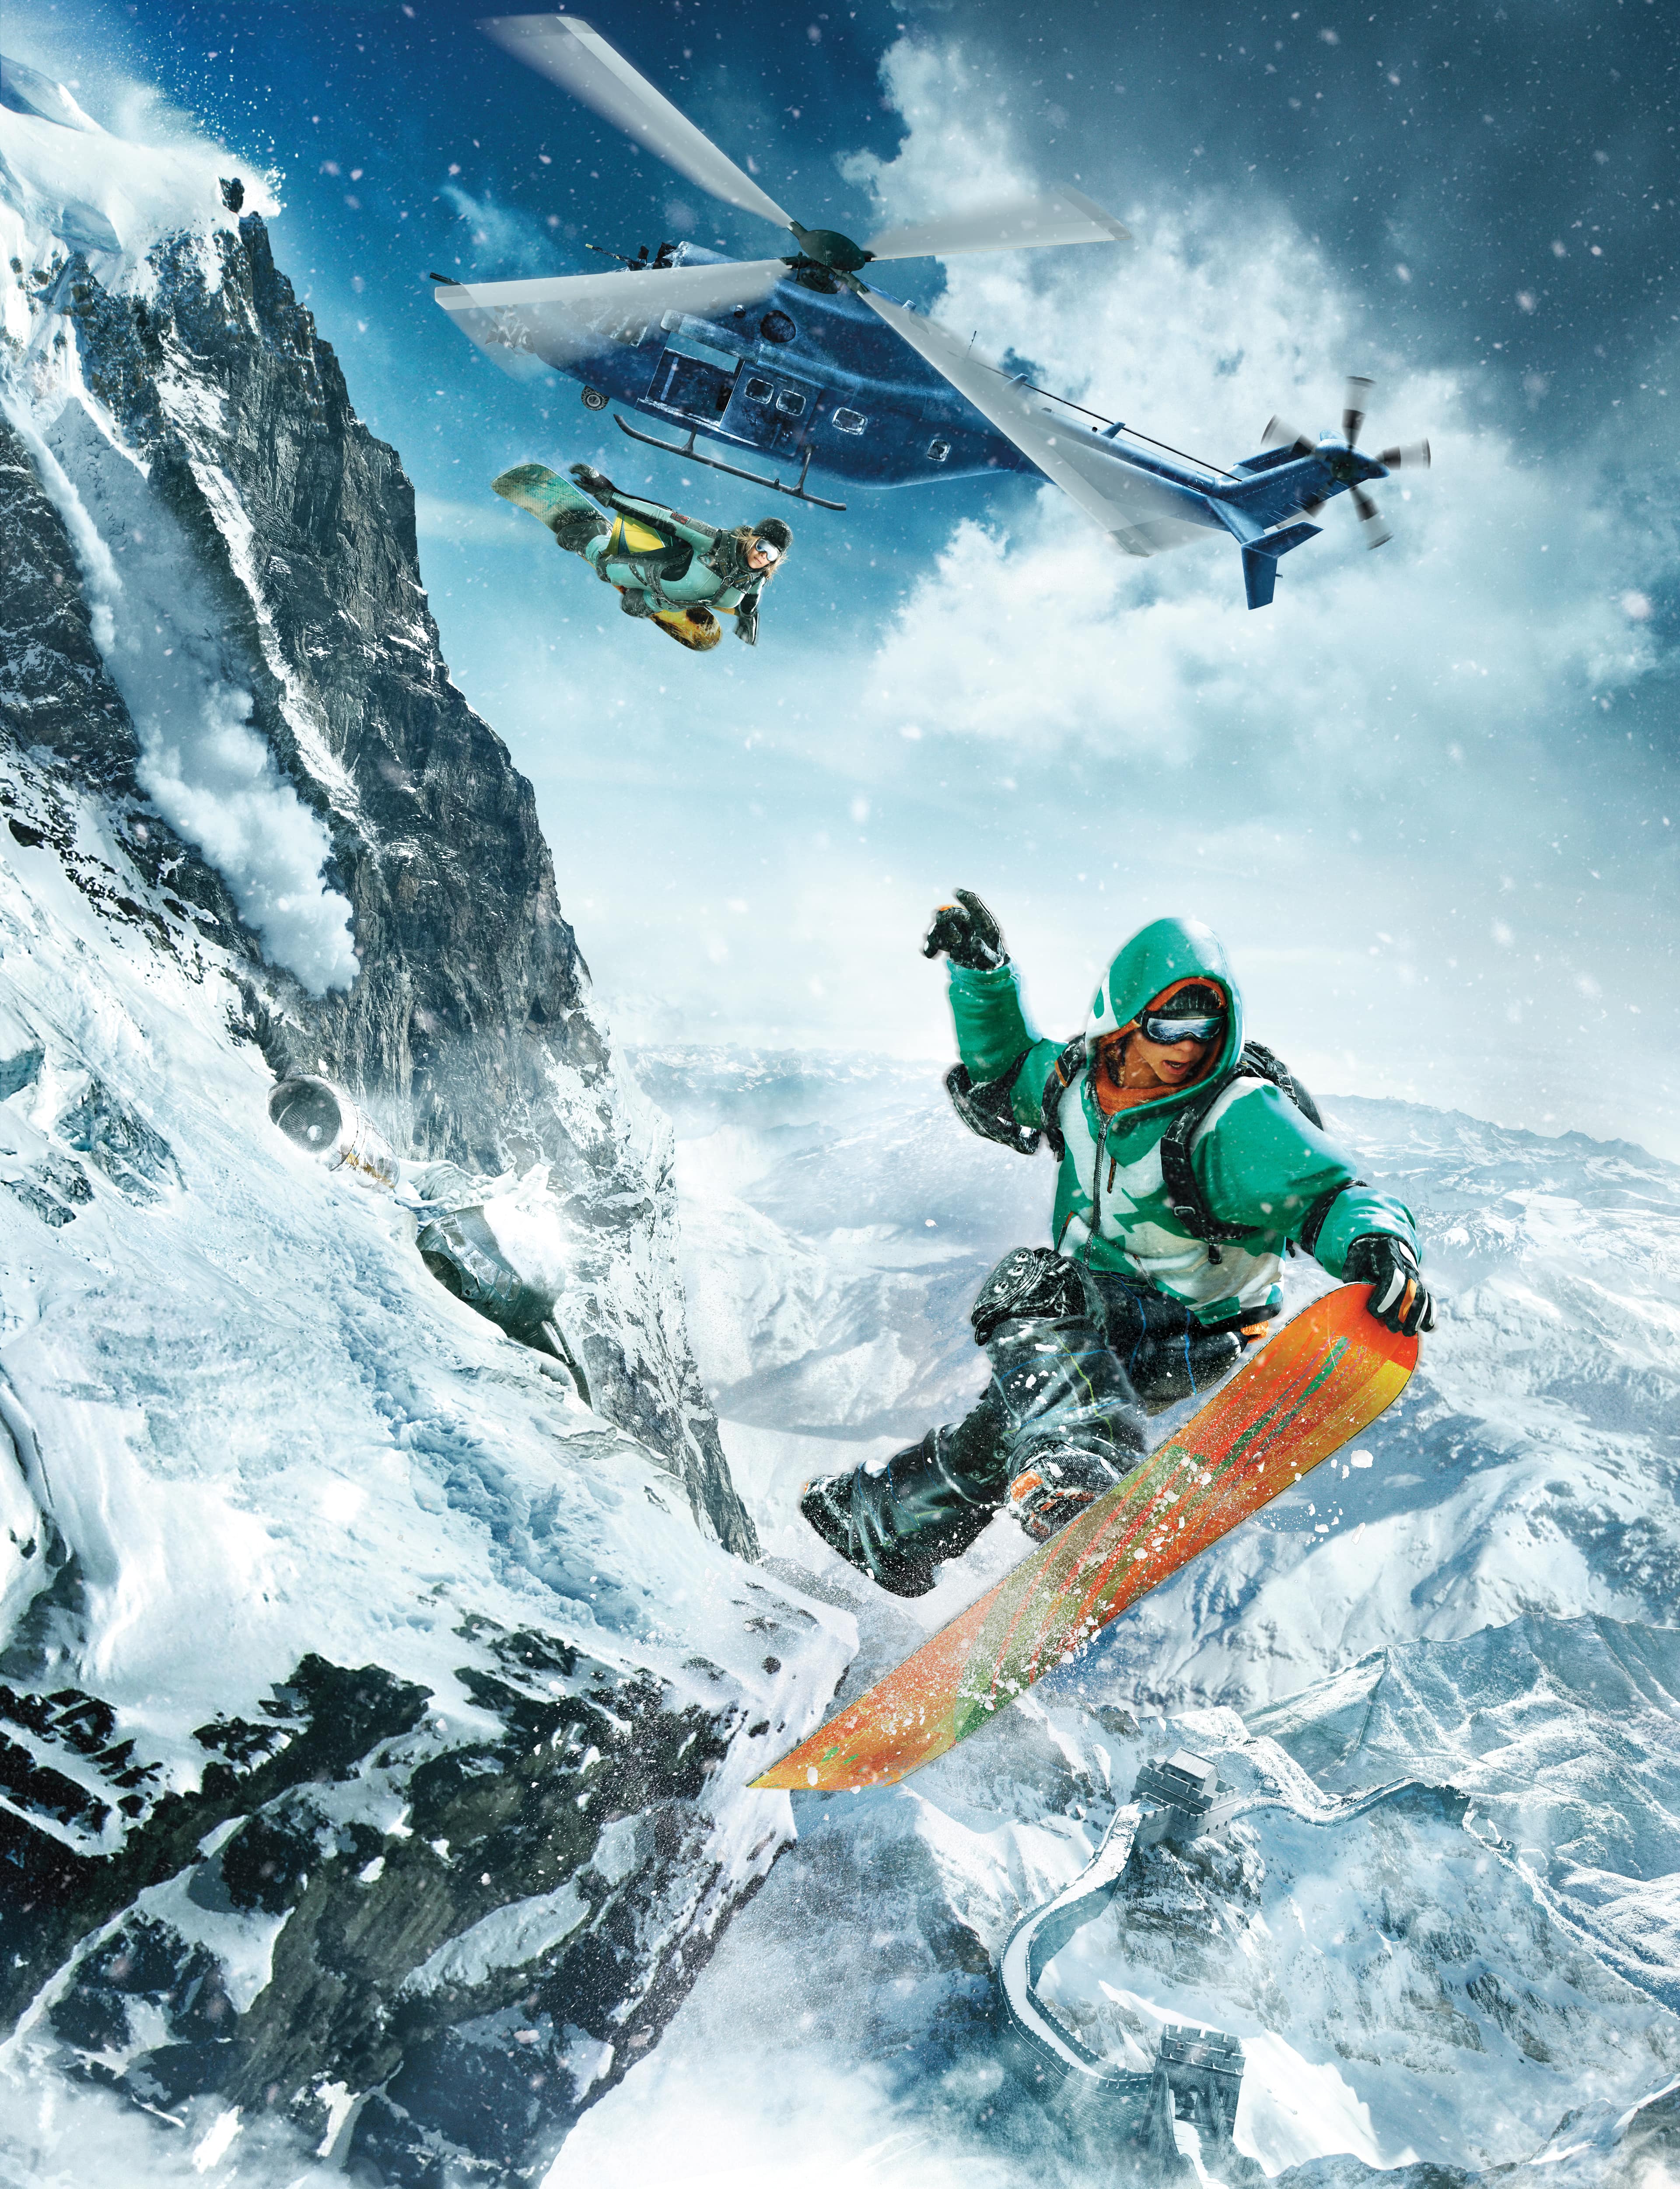 Ssx 2012 pc download